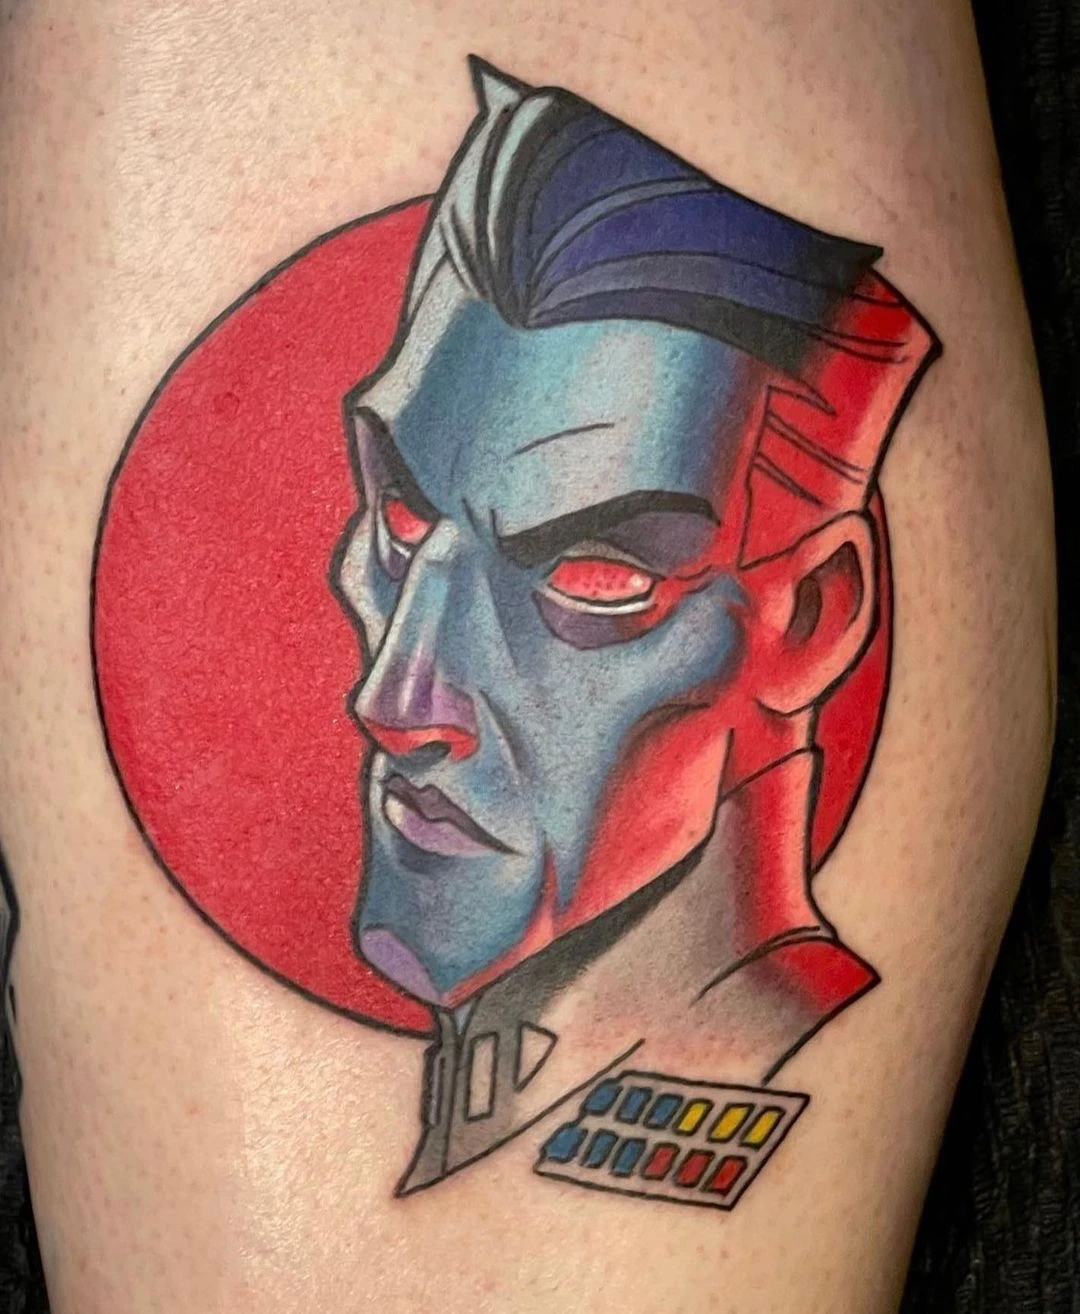 Grand Admiral Thrawn Tattoos: A Tribute to the Master Strategist